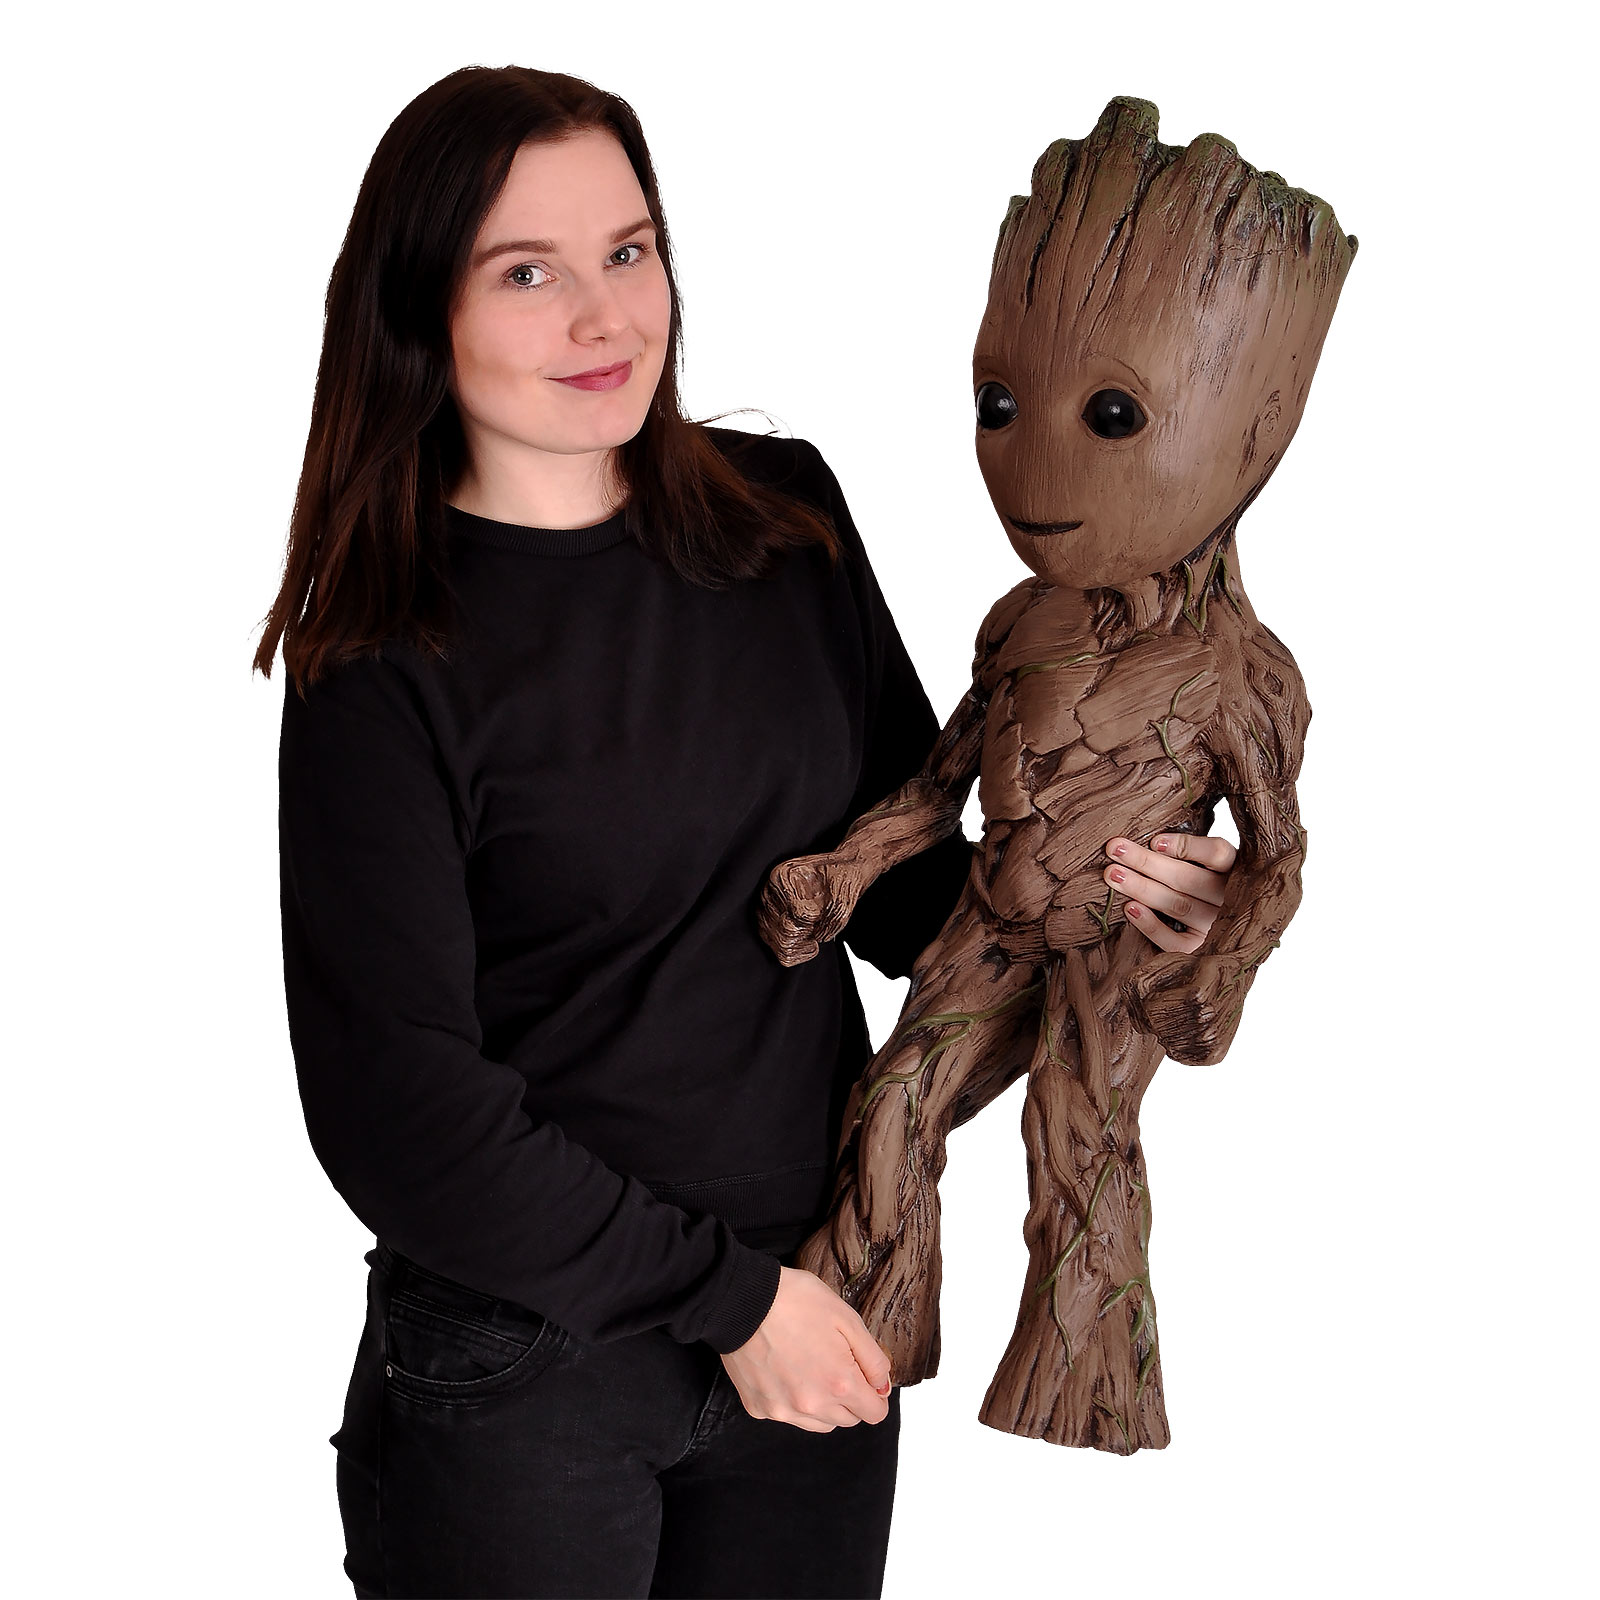 Guardians of the Galaxy - Groot Figur 79 cm Deluxe